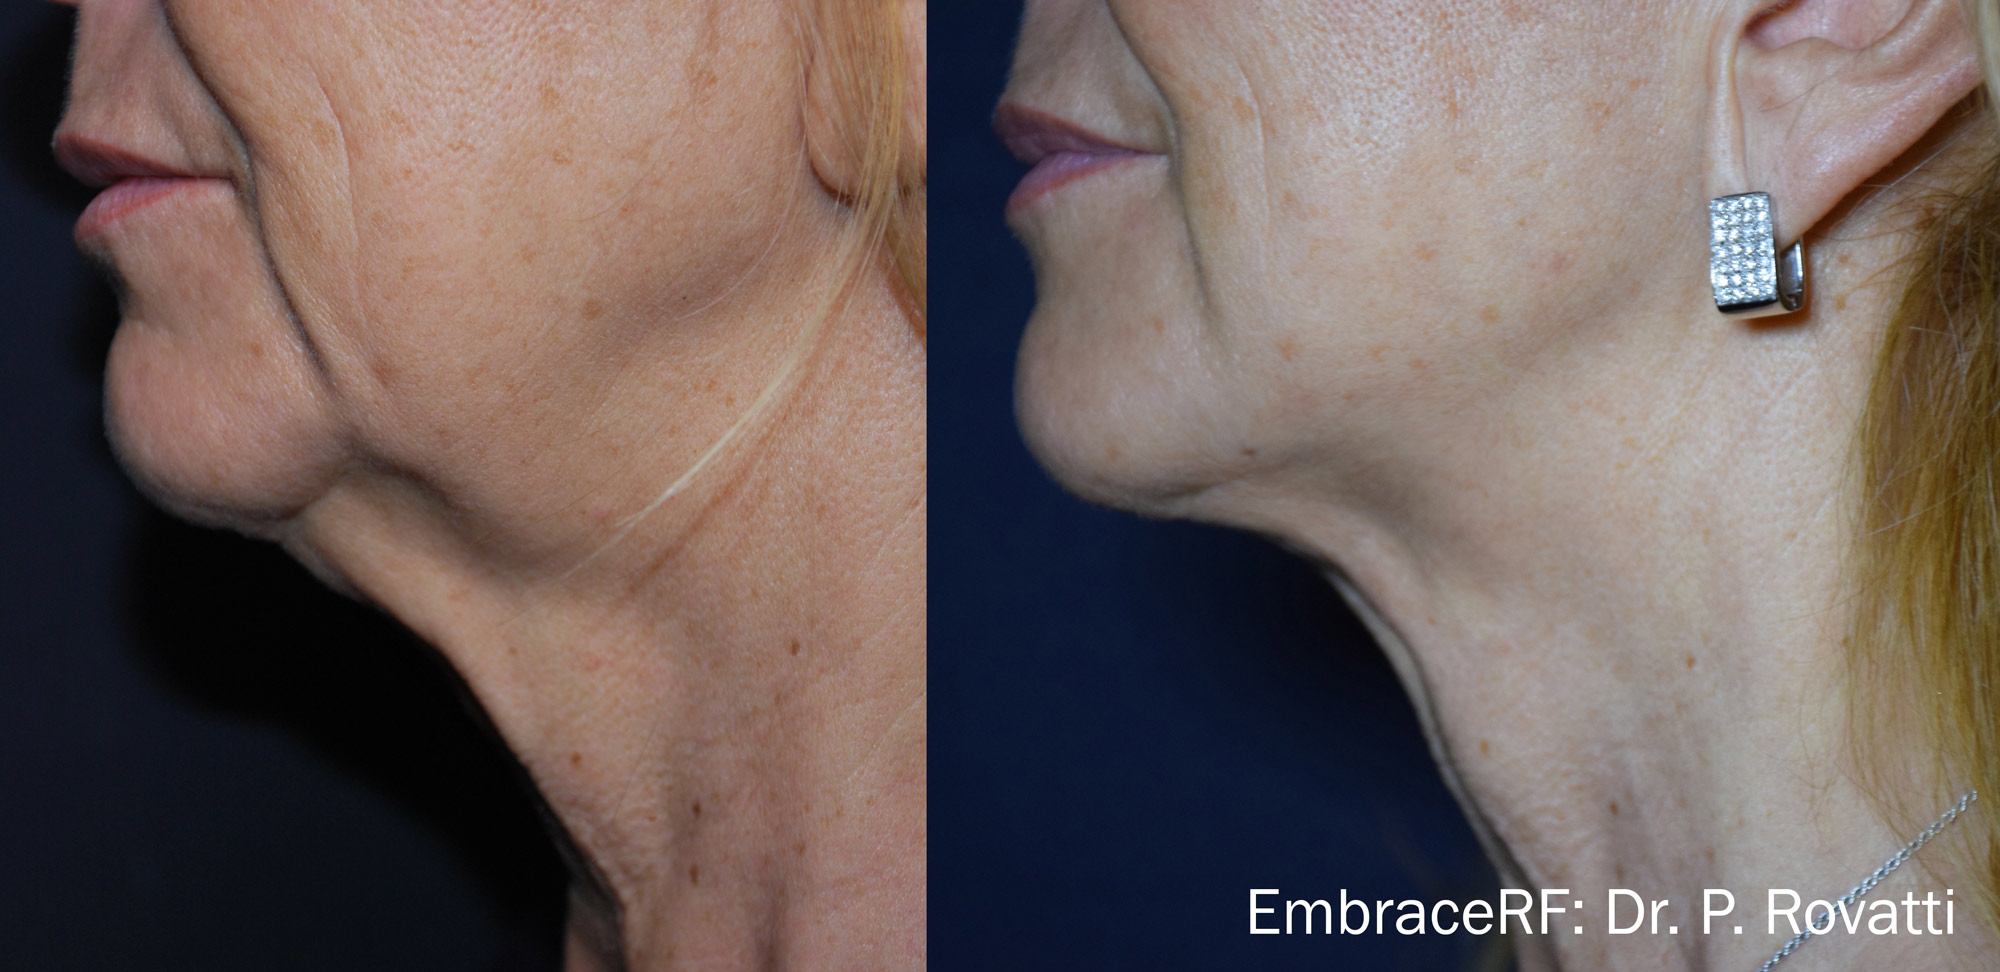 before and after embrace treatment